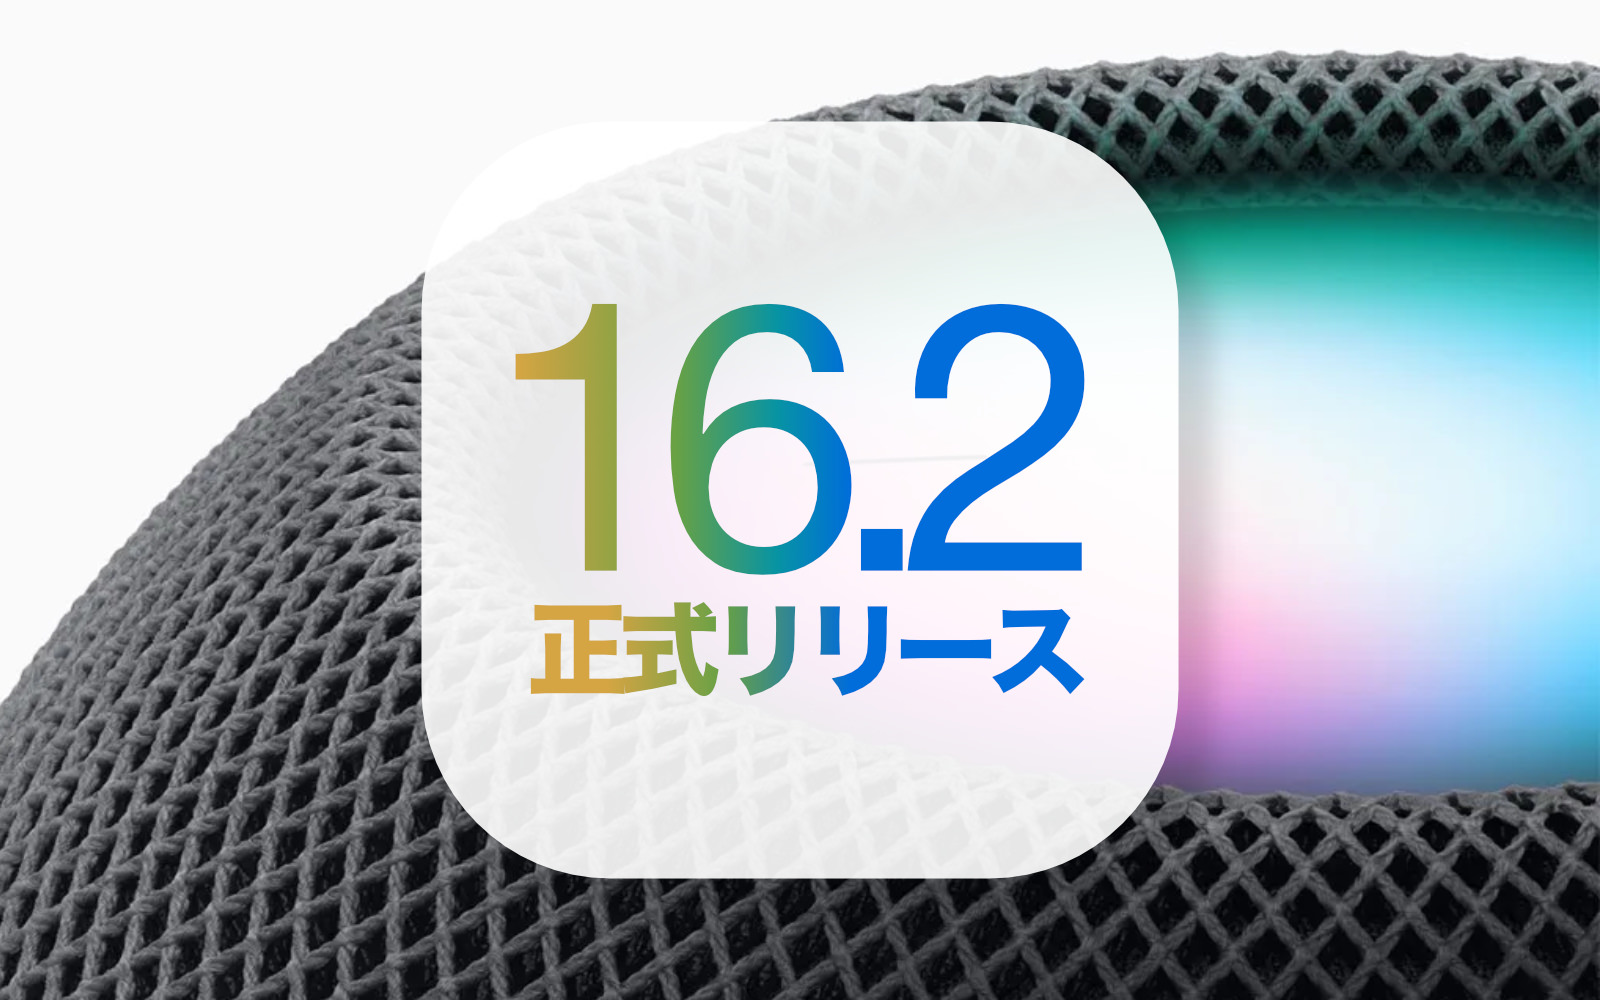 Homepod software update 16 2 official release